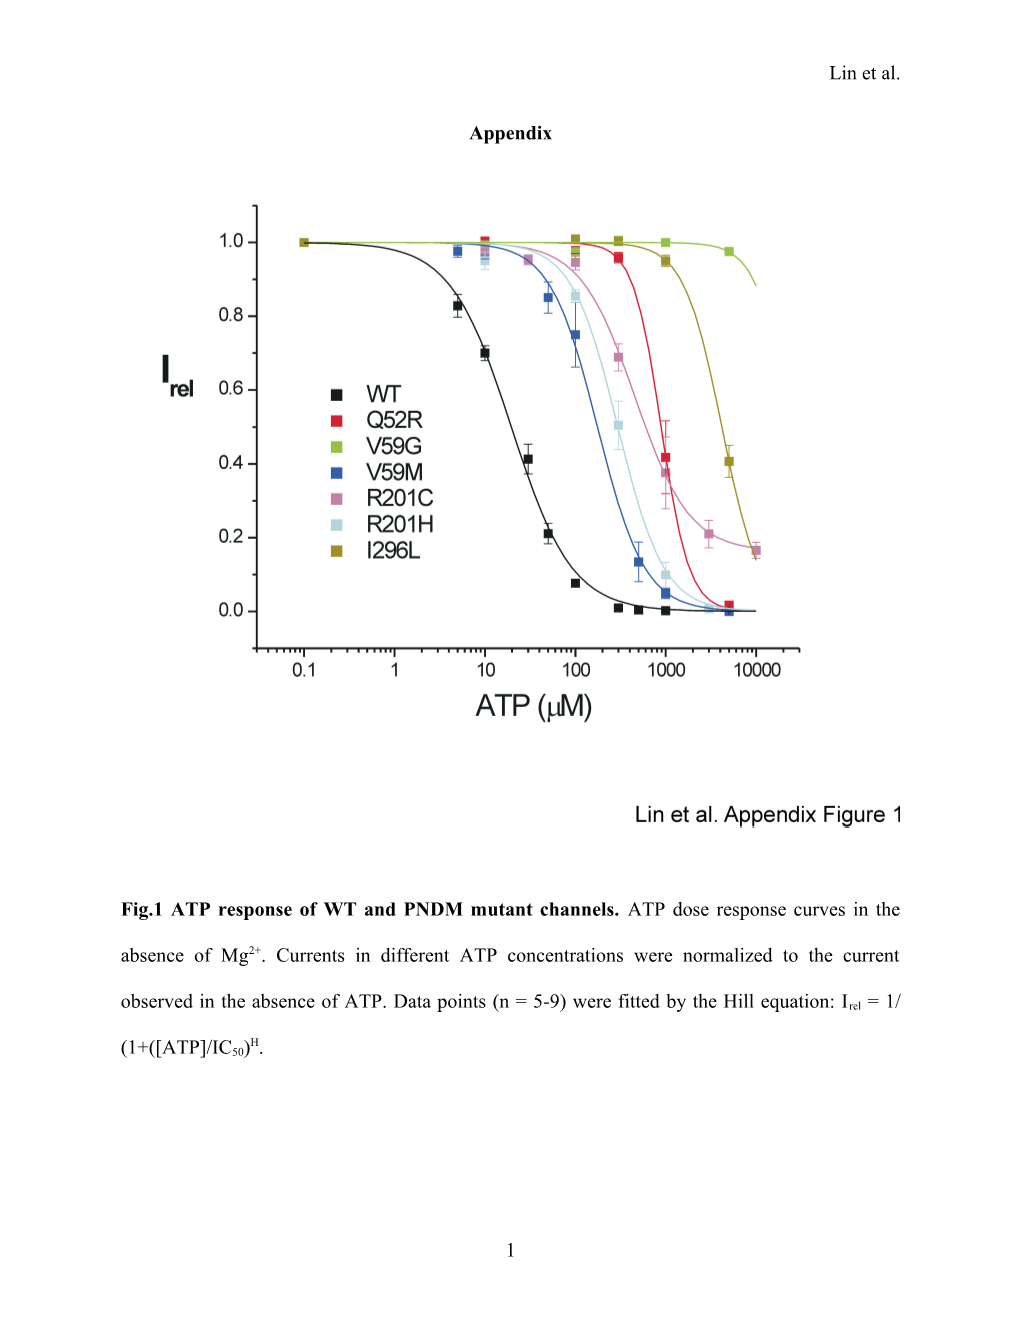 Tablei. Comparison of IC50 ATP from This Study and Previous Studies